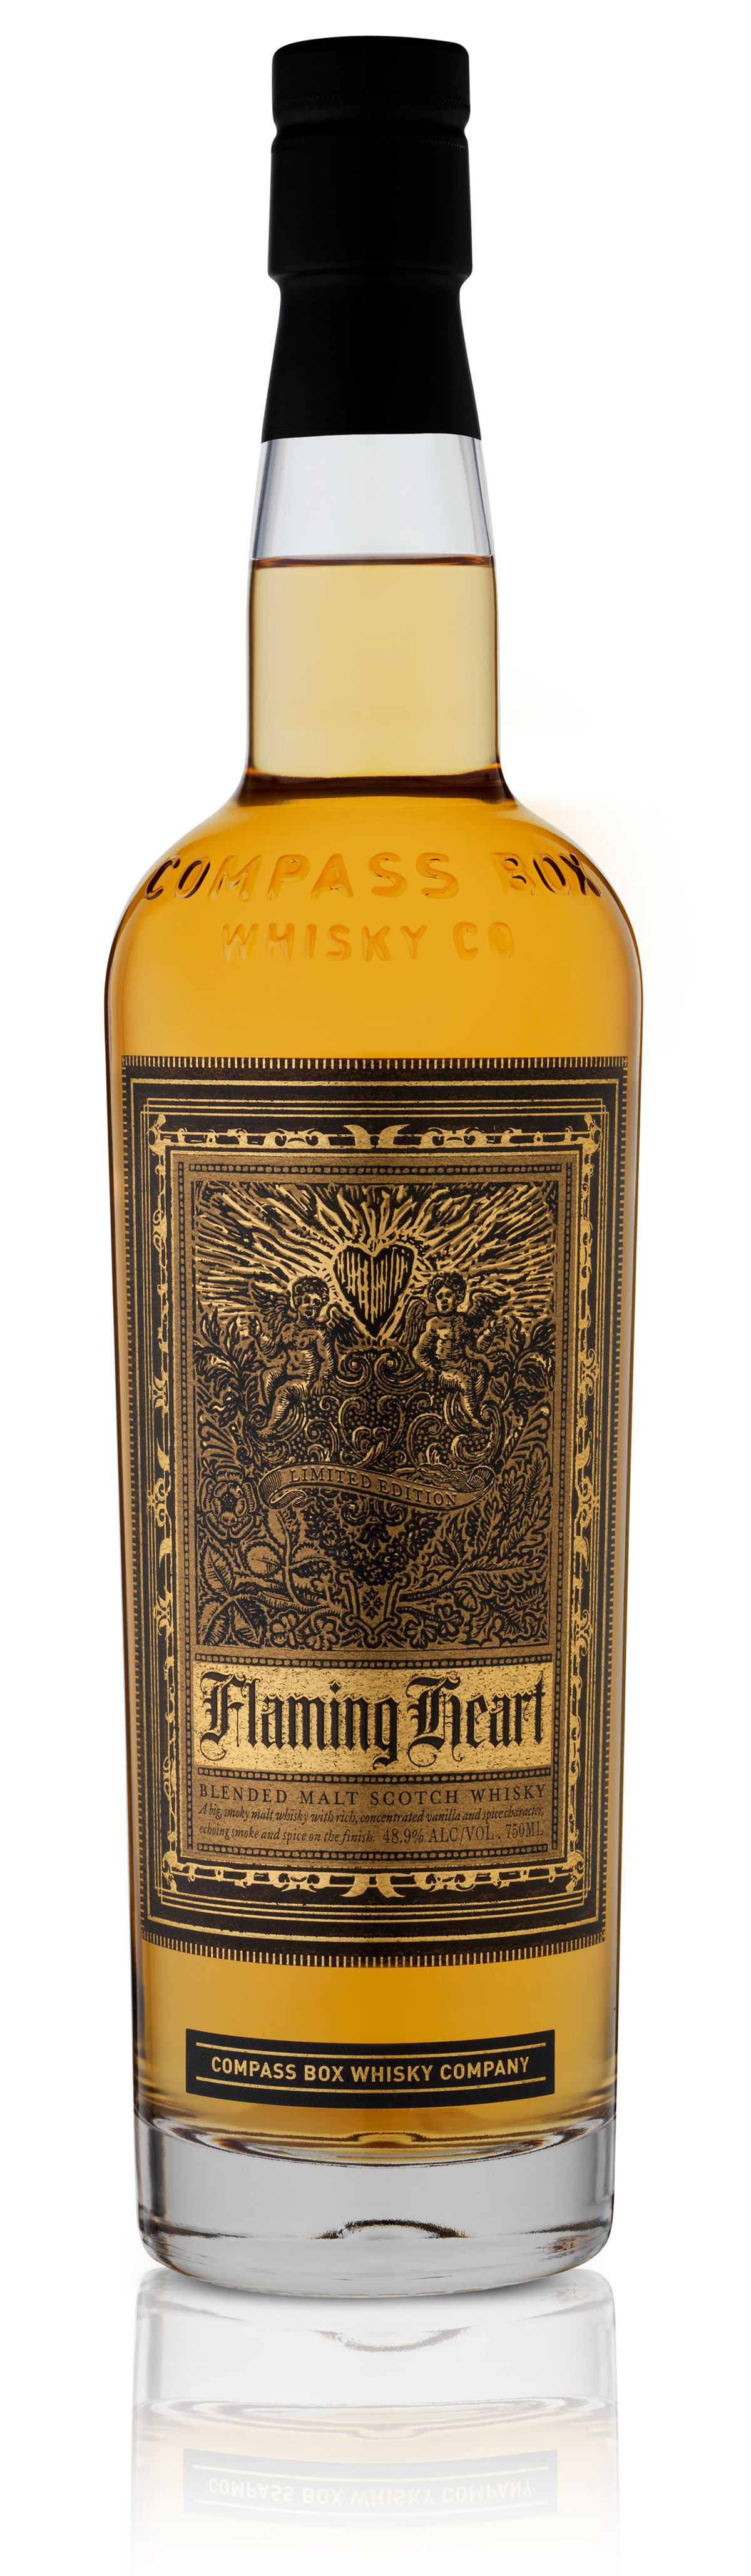 flaming heart Compass Box Stranger & Stranger Flaming heart cupid alcohol bottle scotch malt compass limited edition gold black Whisky